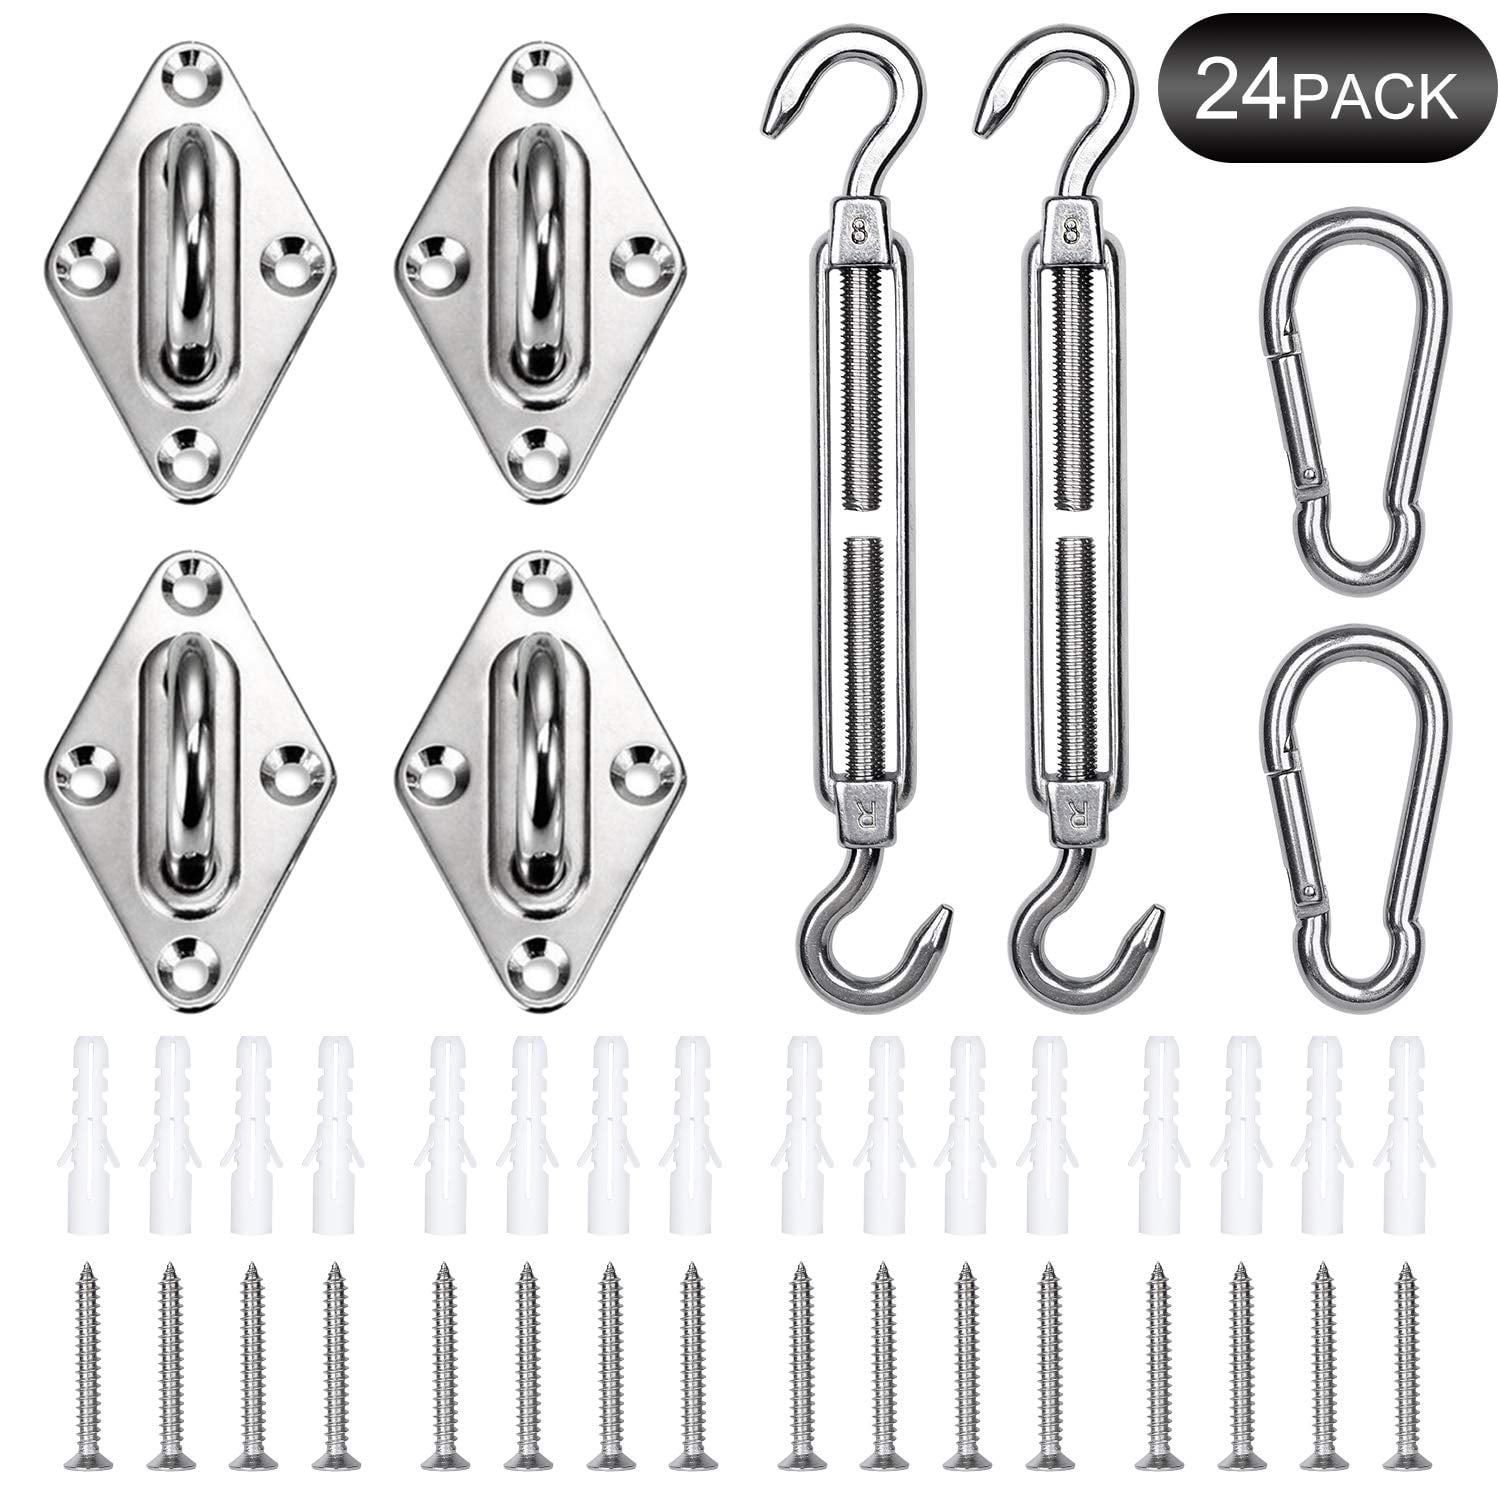 SODIAL Awning Attachment Set Heavy Duty Sun Shade Sail Installation Stainless Steel Hardware Kit For And Square Rectangle Sun Sail Fixing